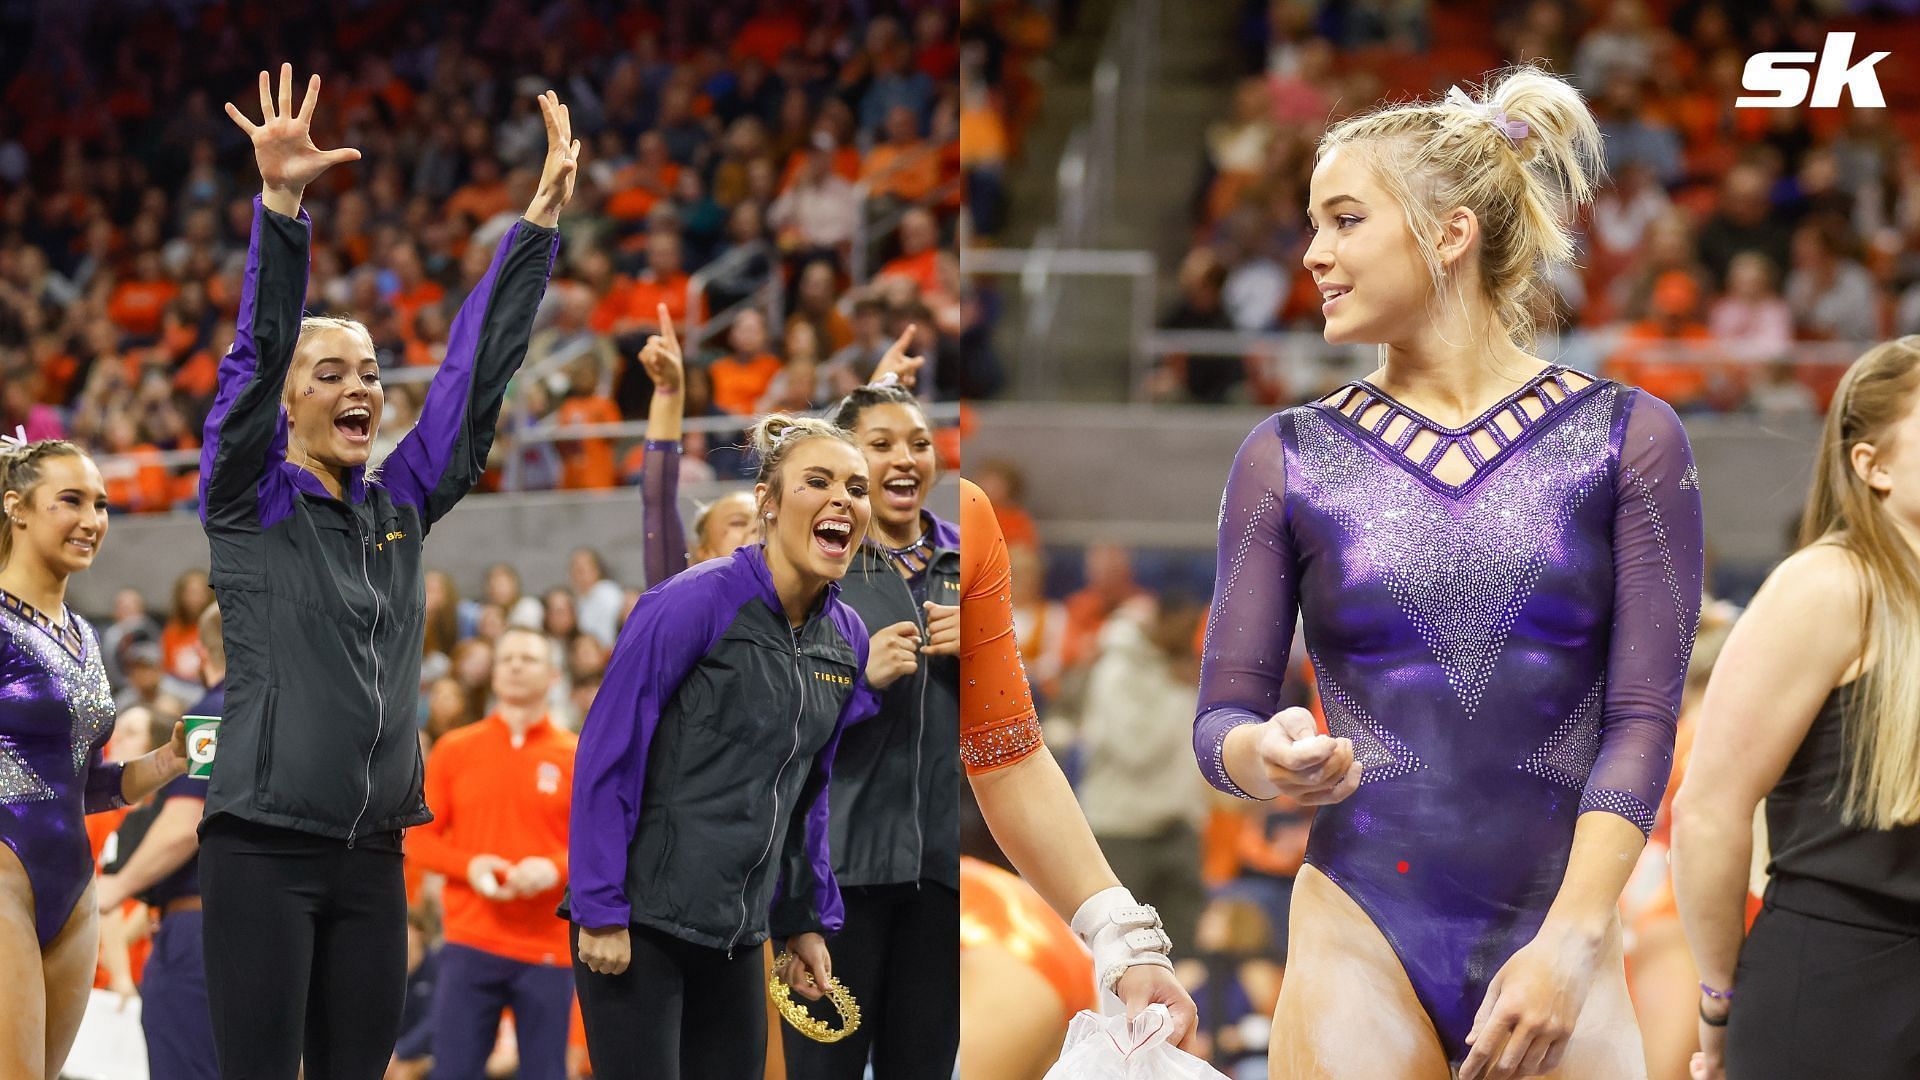 Gymnast Olivia Dunne challenged an LSU fan to give the sport a try